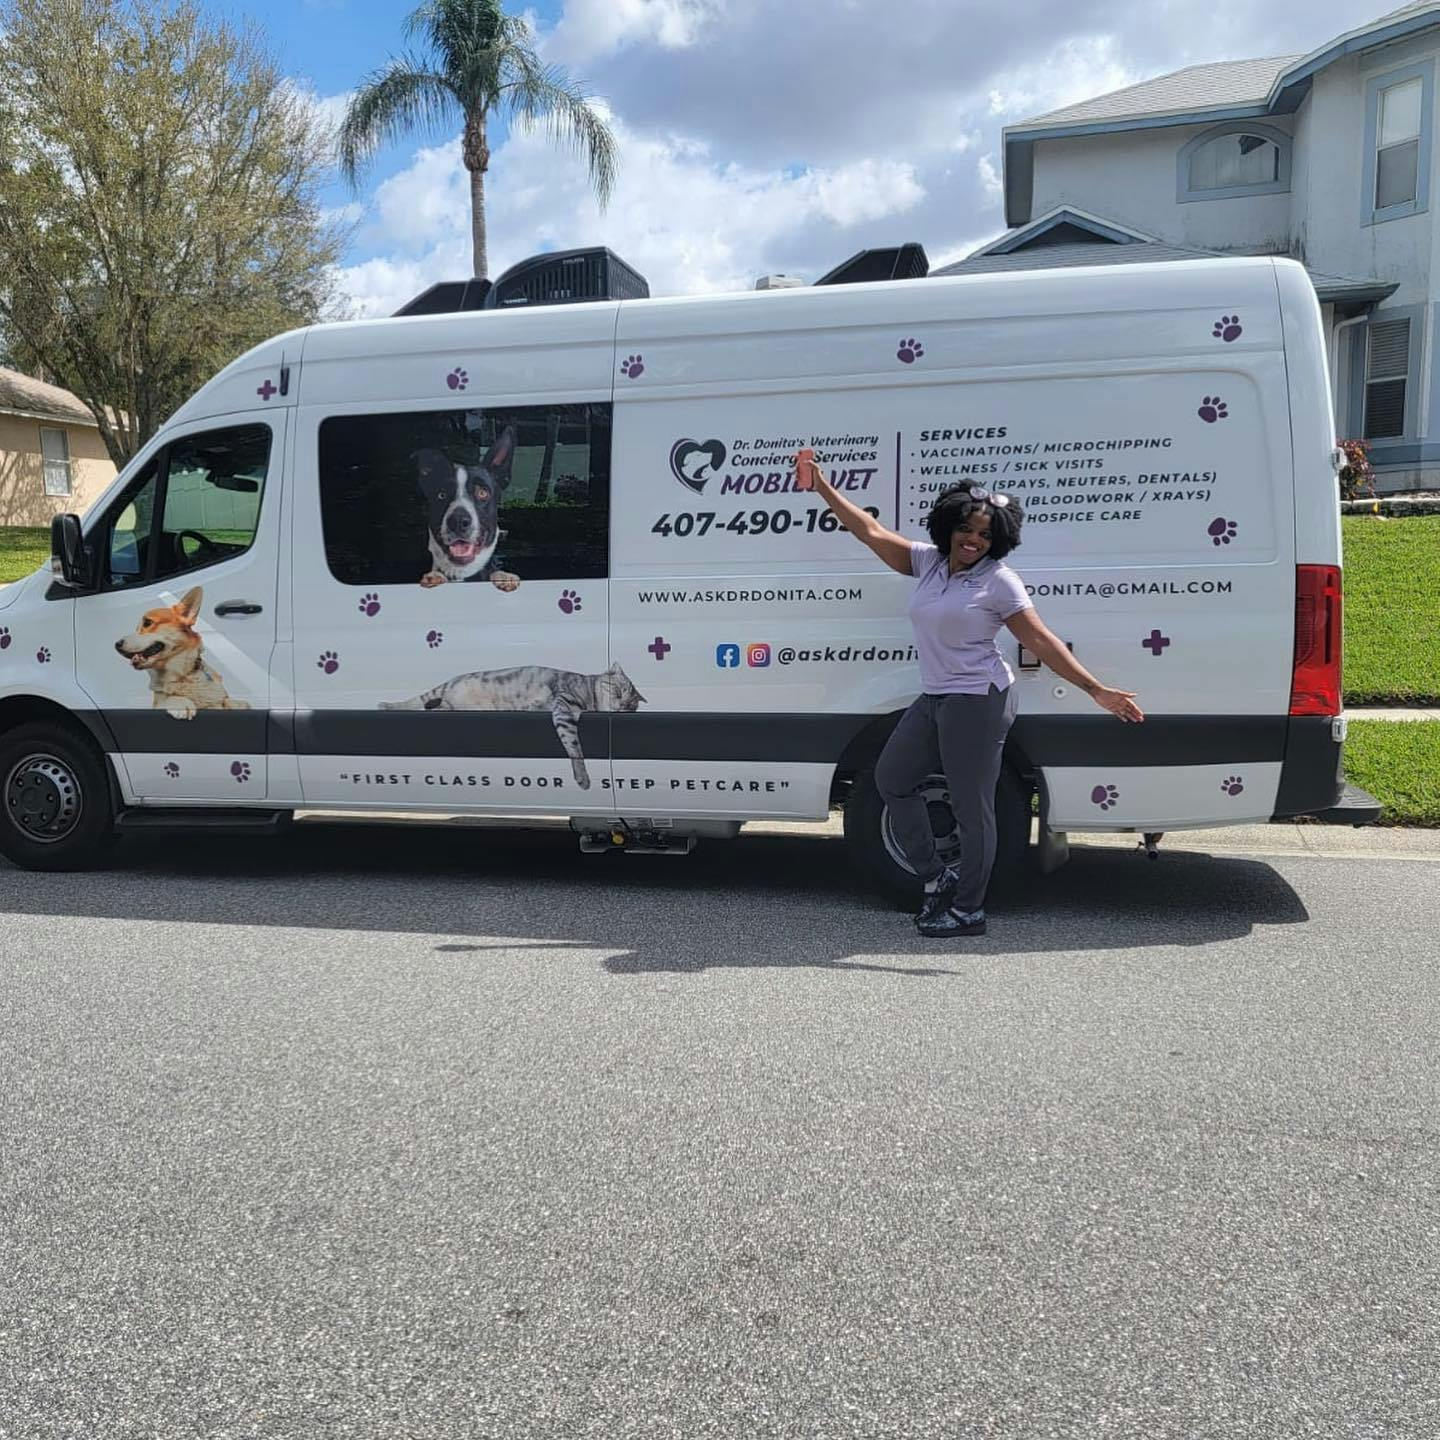 McCants standing next to her mobile veterinary clinic (Image courtesy of Dr Donita)